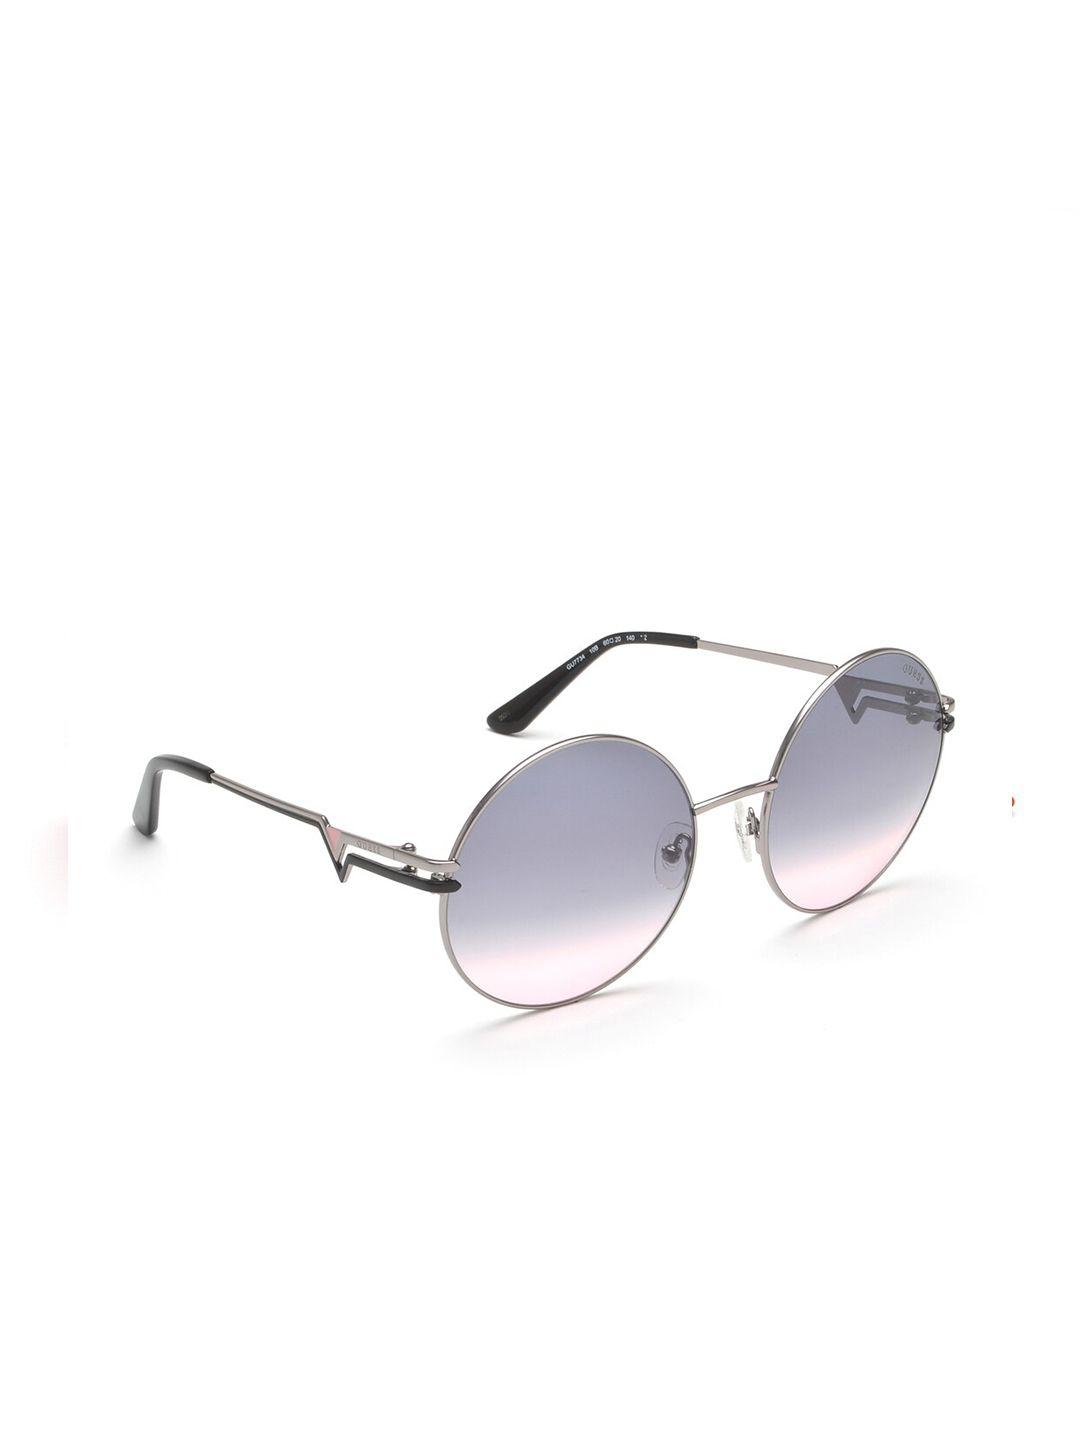 guess-women-grey-lens-&-silver-toned-round-sunglasses-gus77346010bsg